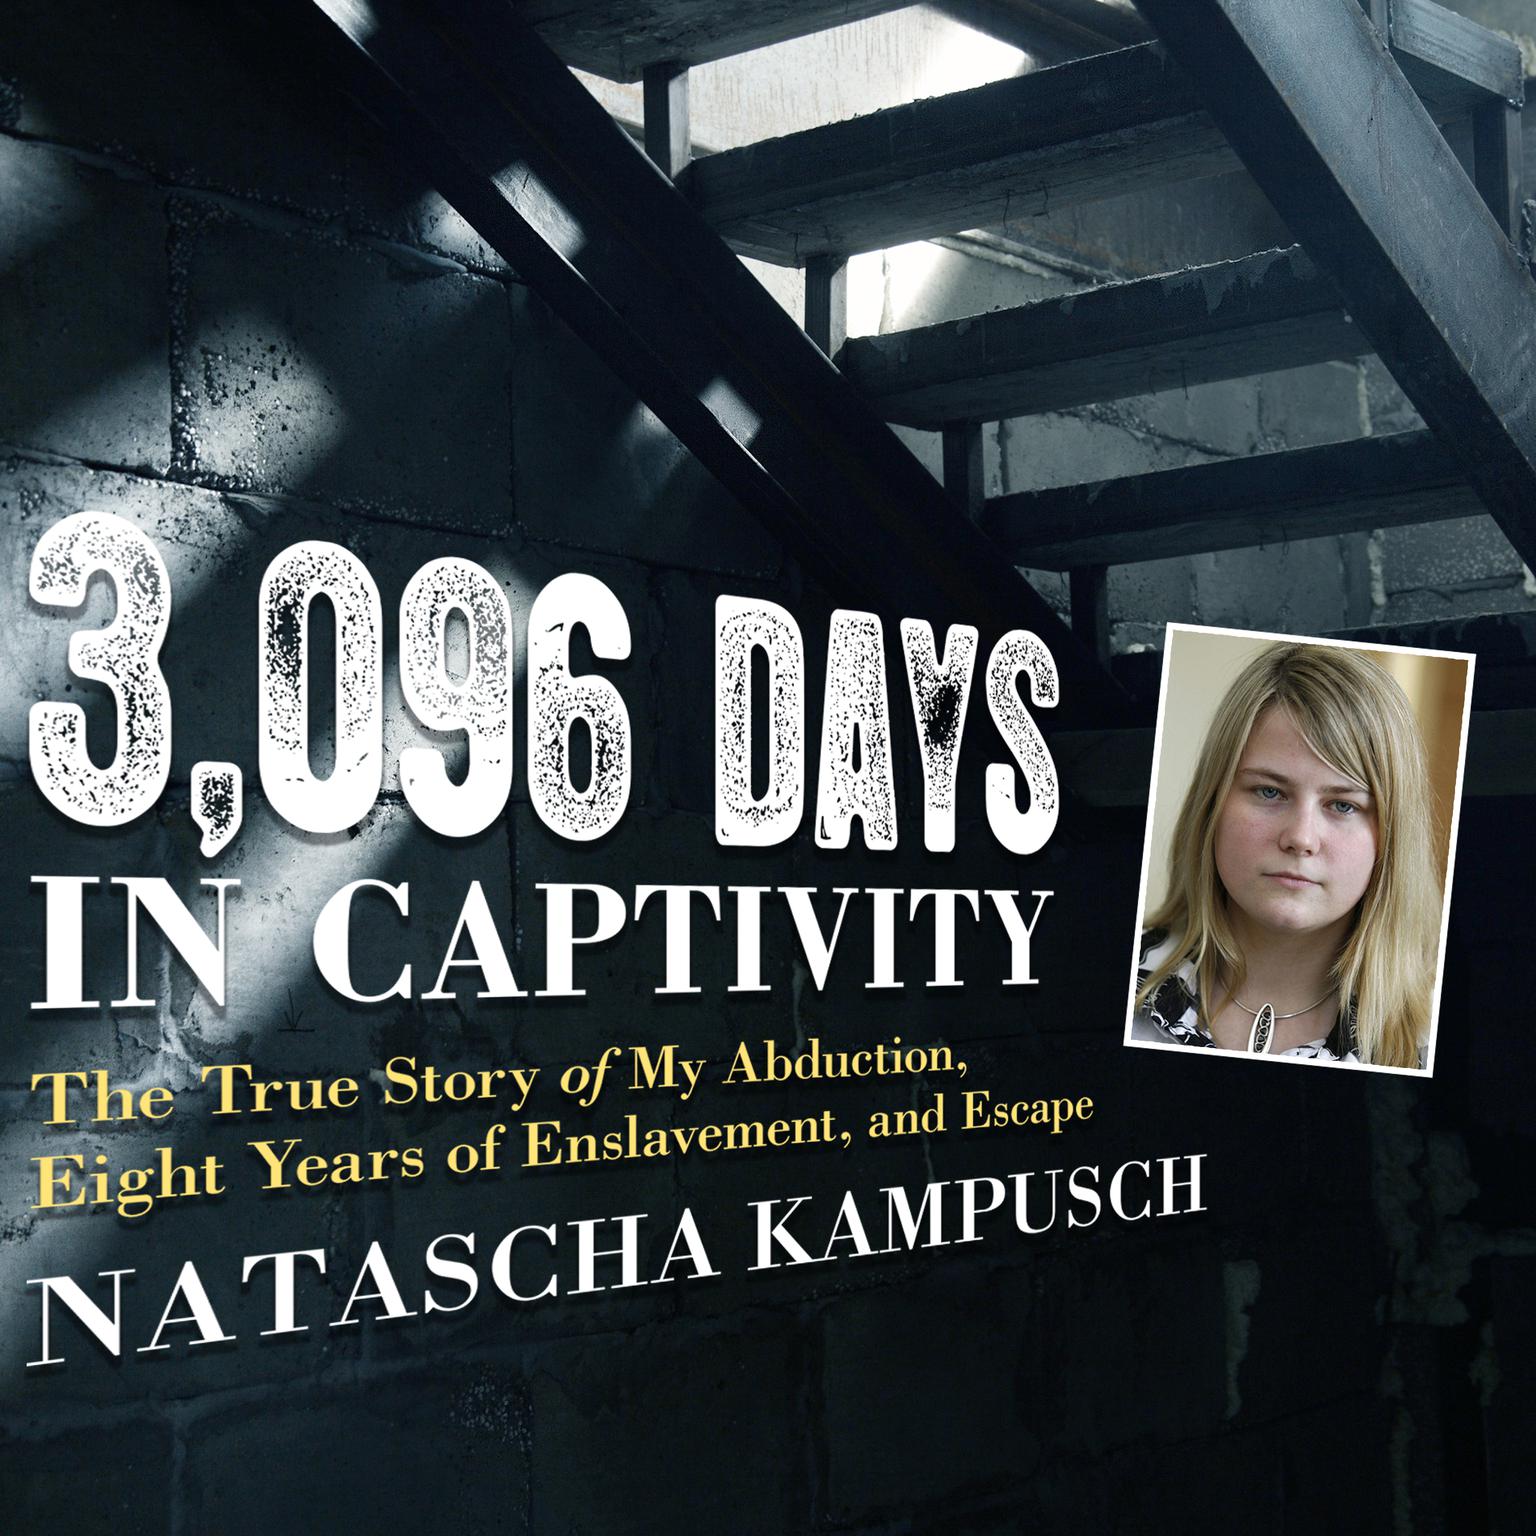 3,096 Days in Captivity: The True Story of My Abduction, Eight Years of Enslavement, and Escape Audiobook, by Natascha Kampusch